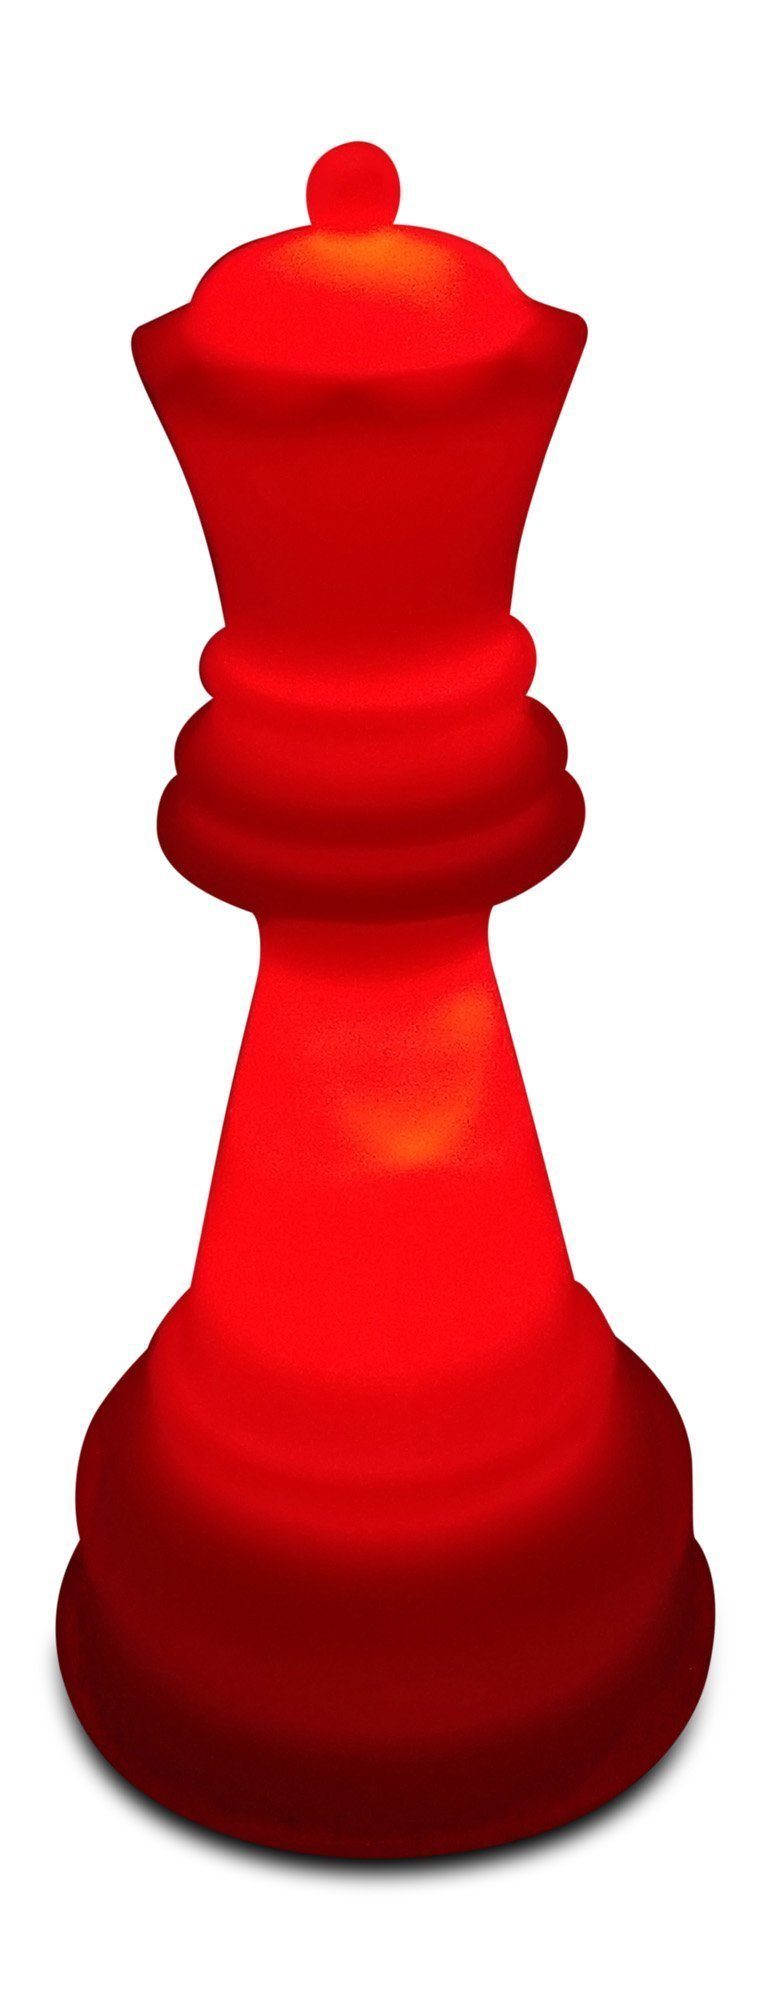 MegaChess 22 Inch Premium Plastic Queen Light-Up Giant Chess Piece - Red |  | GiantChessUSA